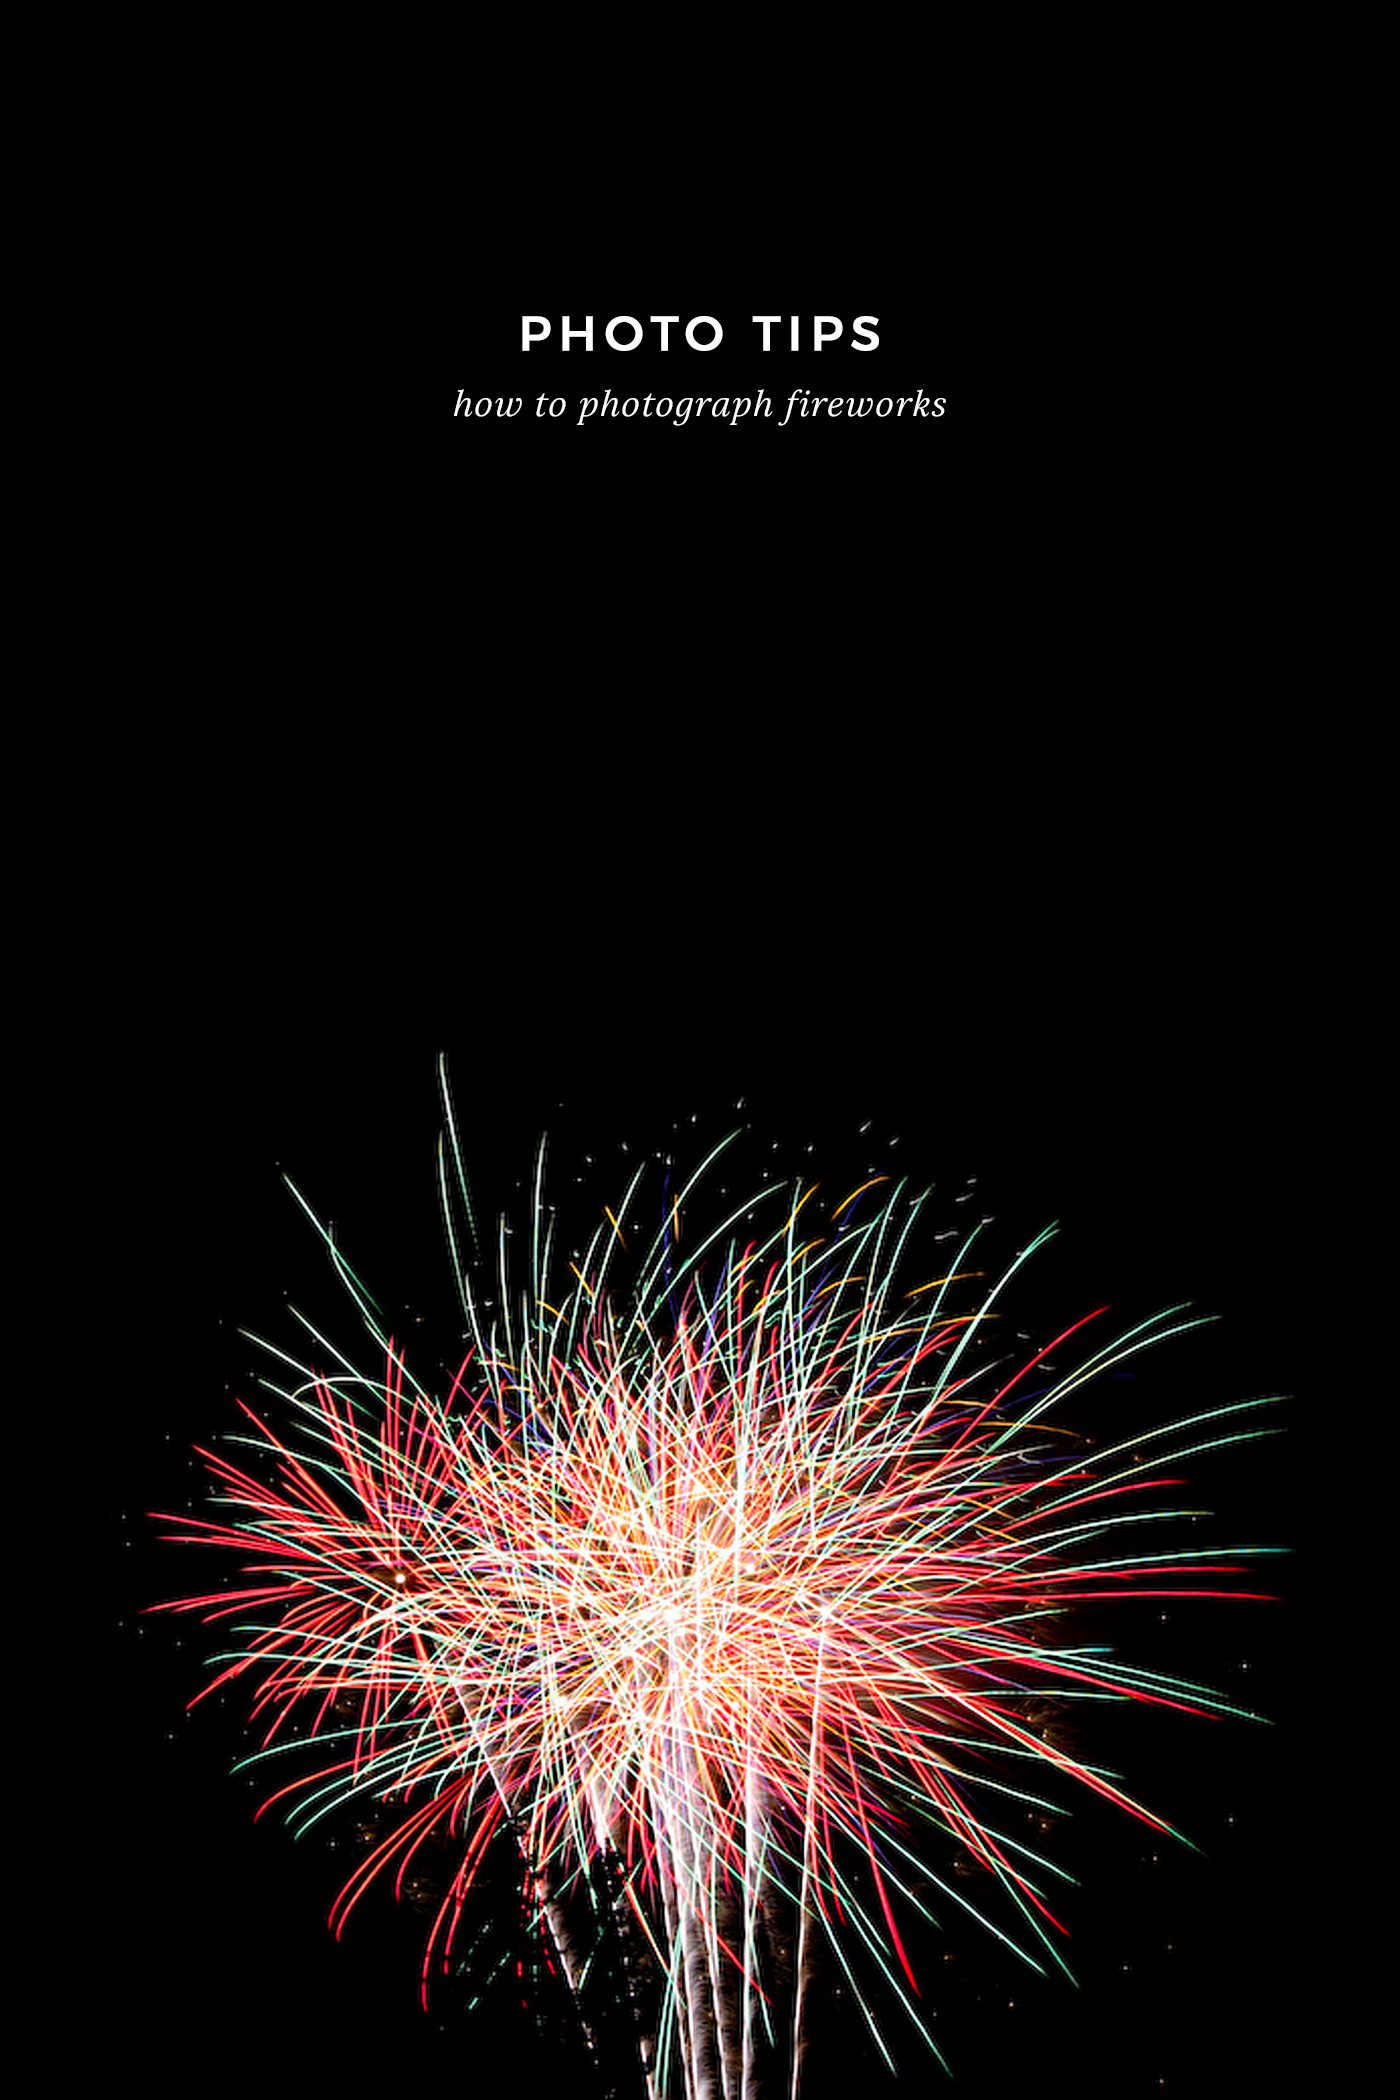 How to photograph fireworks and other fun 4th of July photos